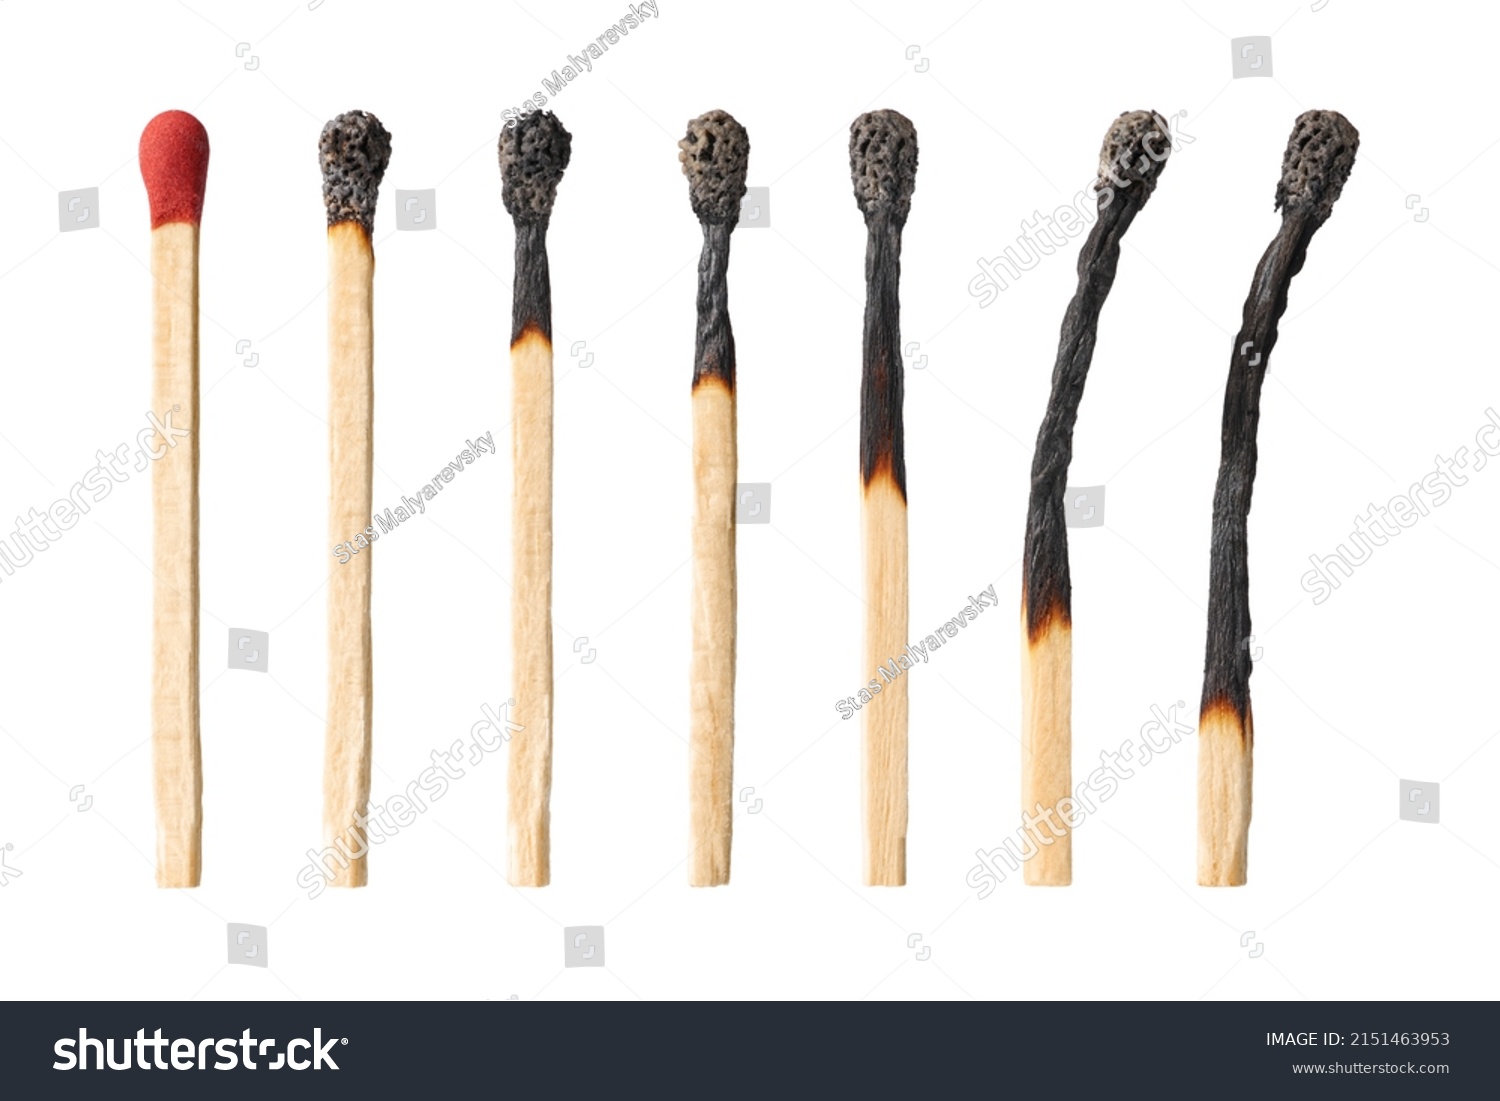 Burnt matches isolated on white. Box of matches. Different stages of match burning Burnt matches. Full depth of field. #2151463953